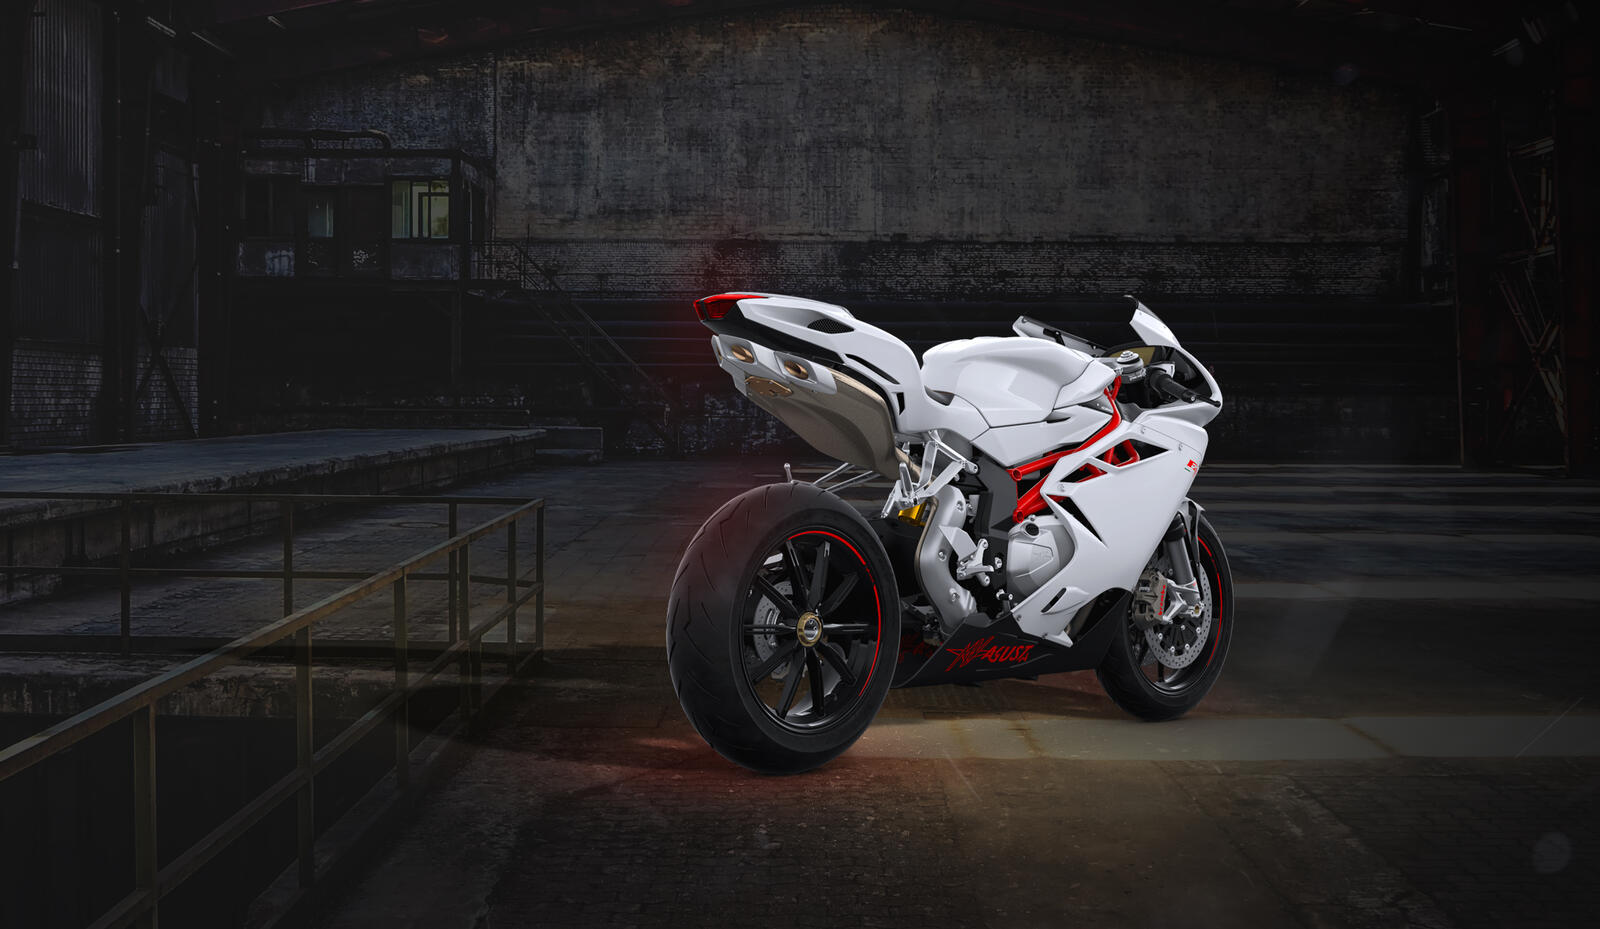 Wallpapers MV Agusta motorcycles view from behind on the desktop